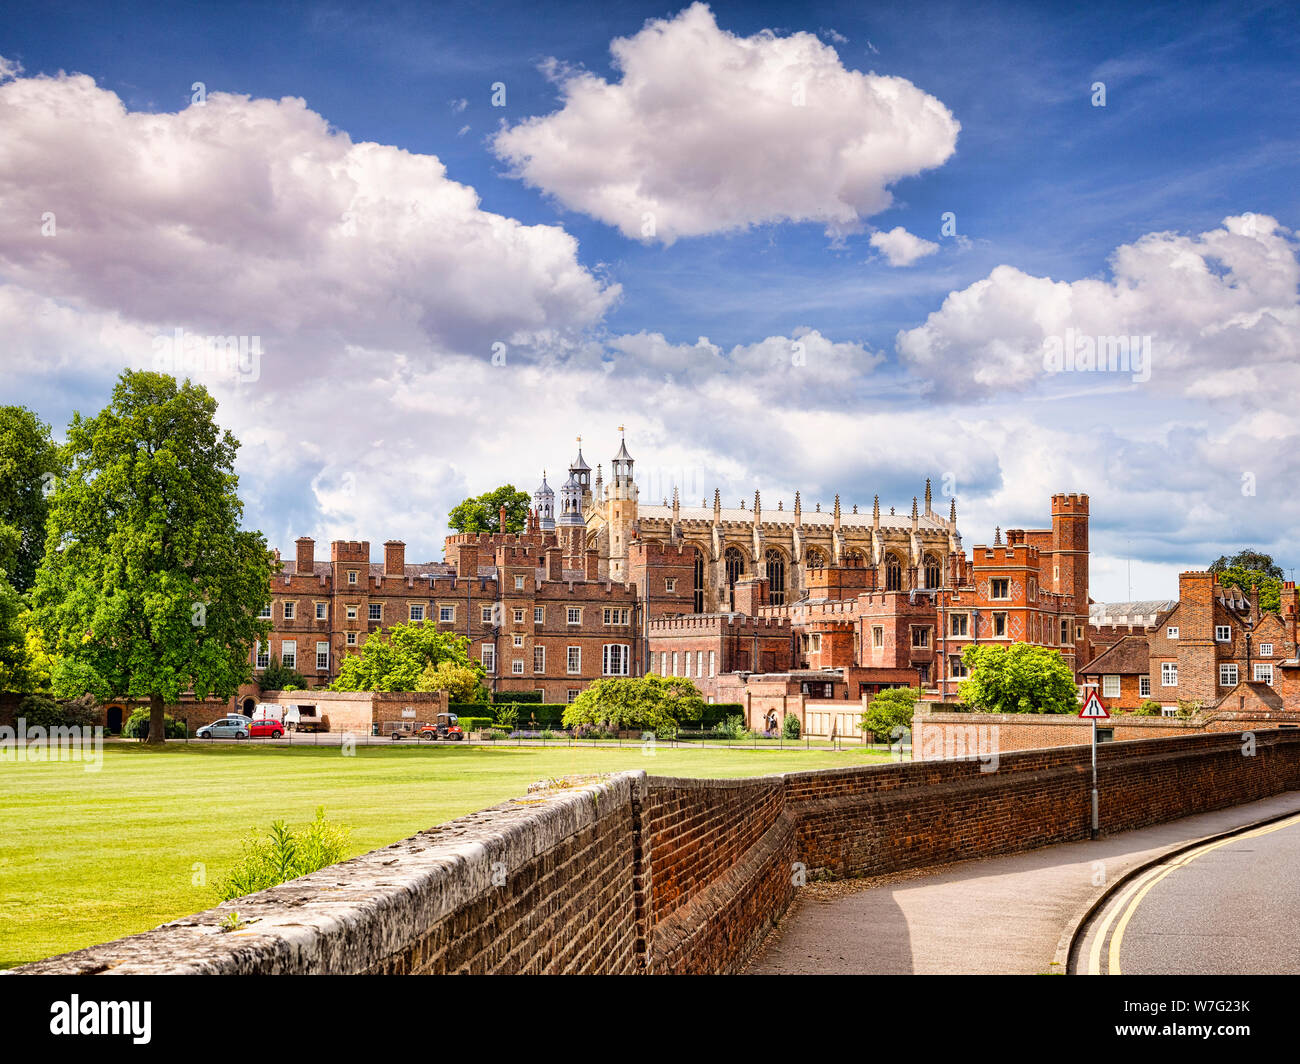 5 June 2019: Windsor, UK - Eton College, The UK's most famous public school, on a fine summer day with blue sky. Stock Photo